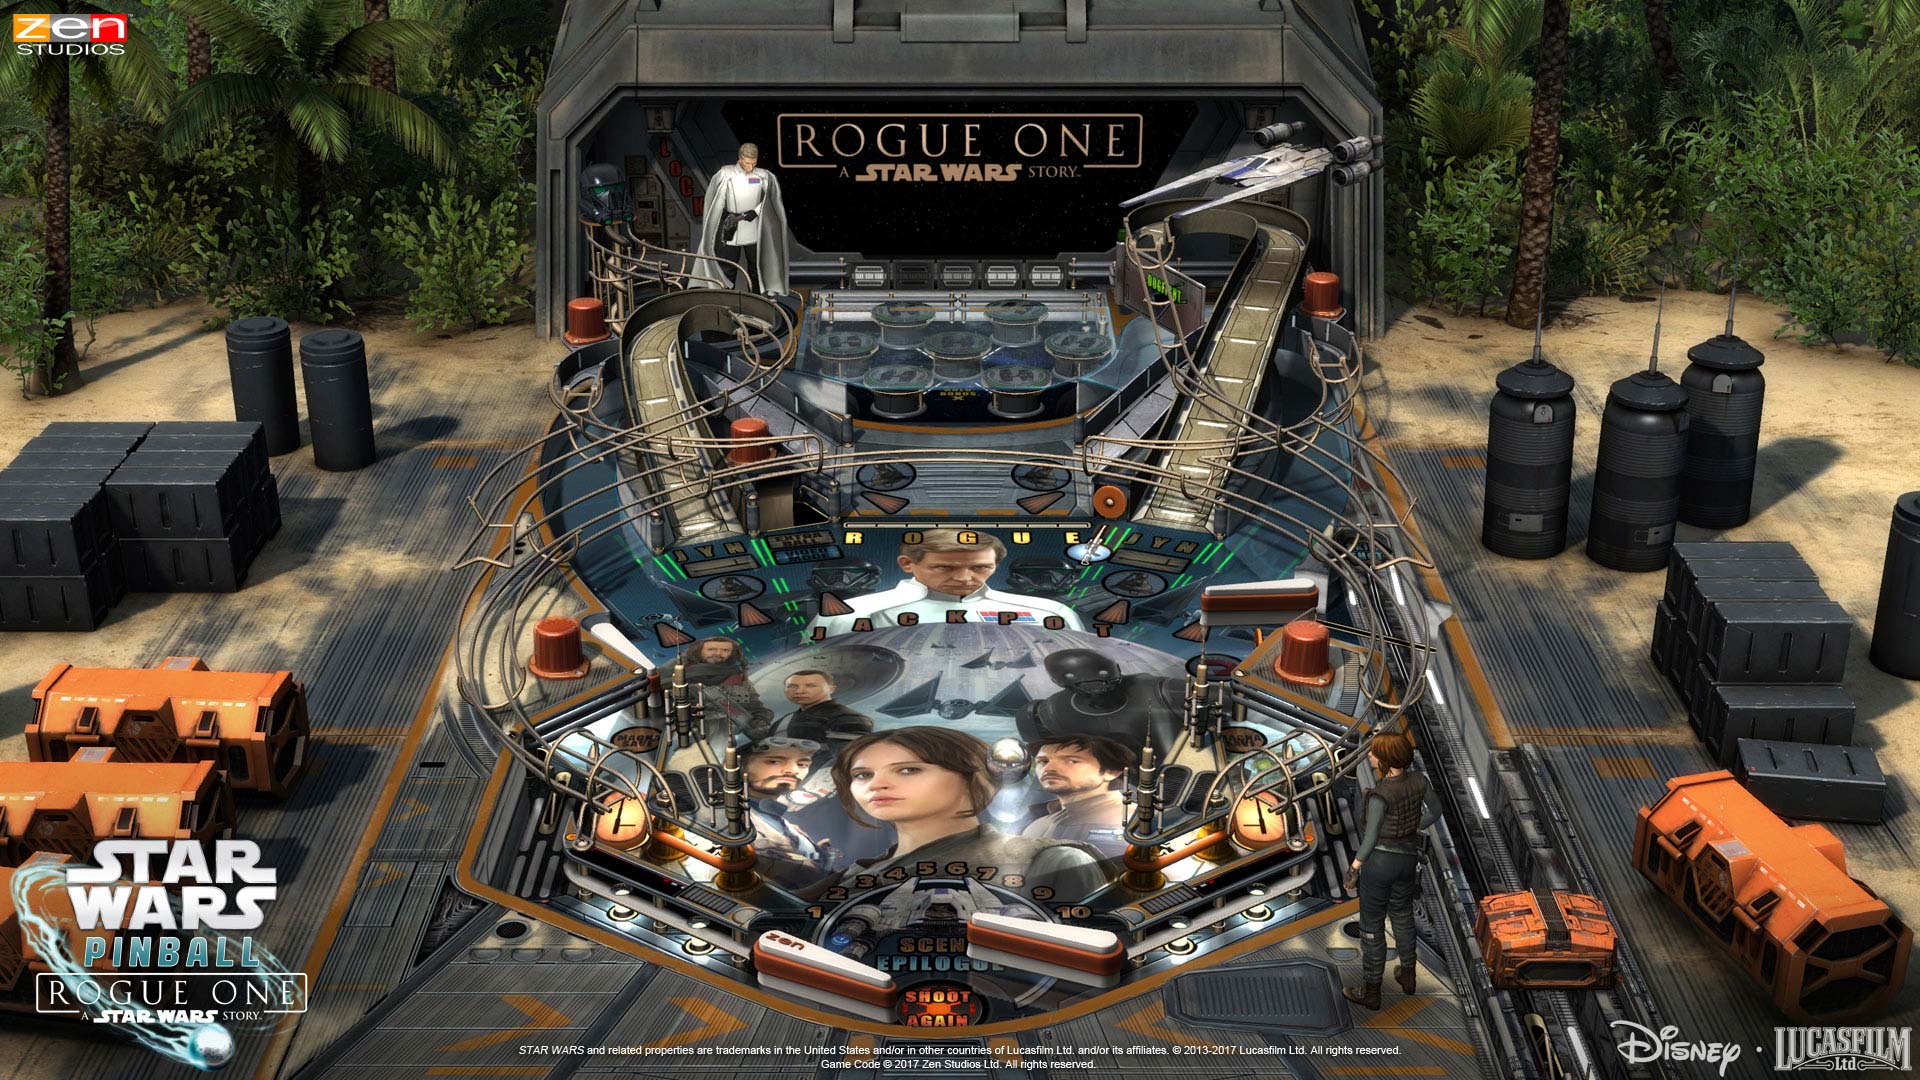 Pinball FX2 Star Wars Rogue One Table on Scarif